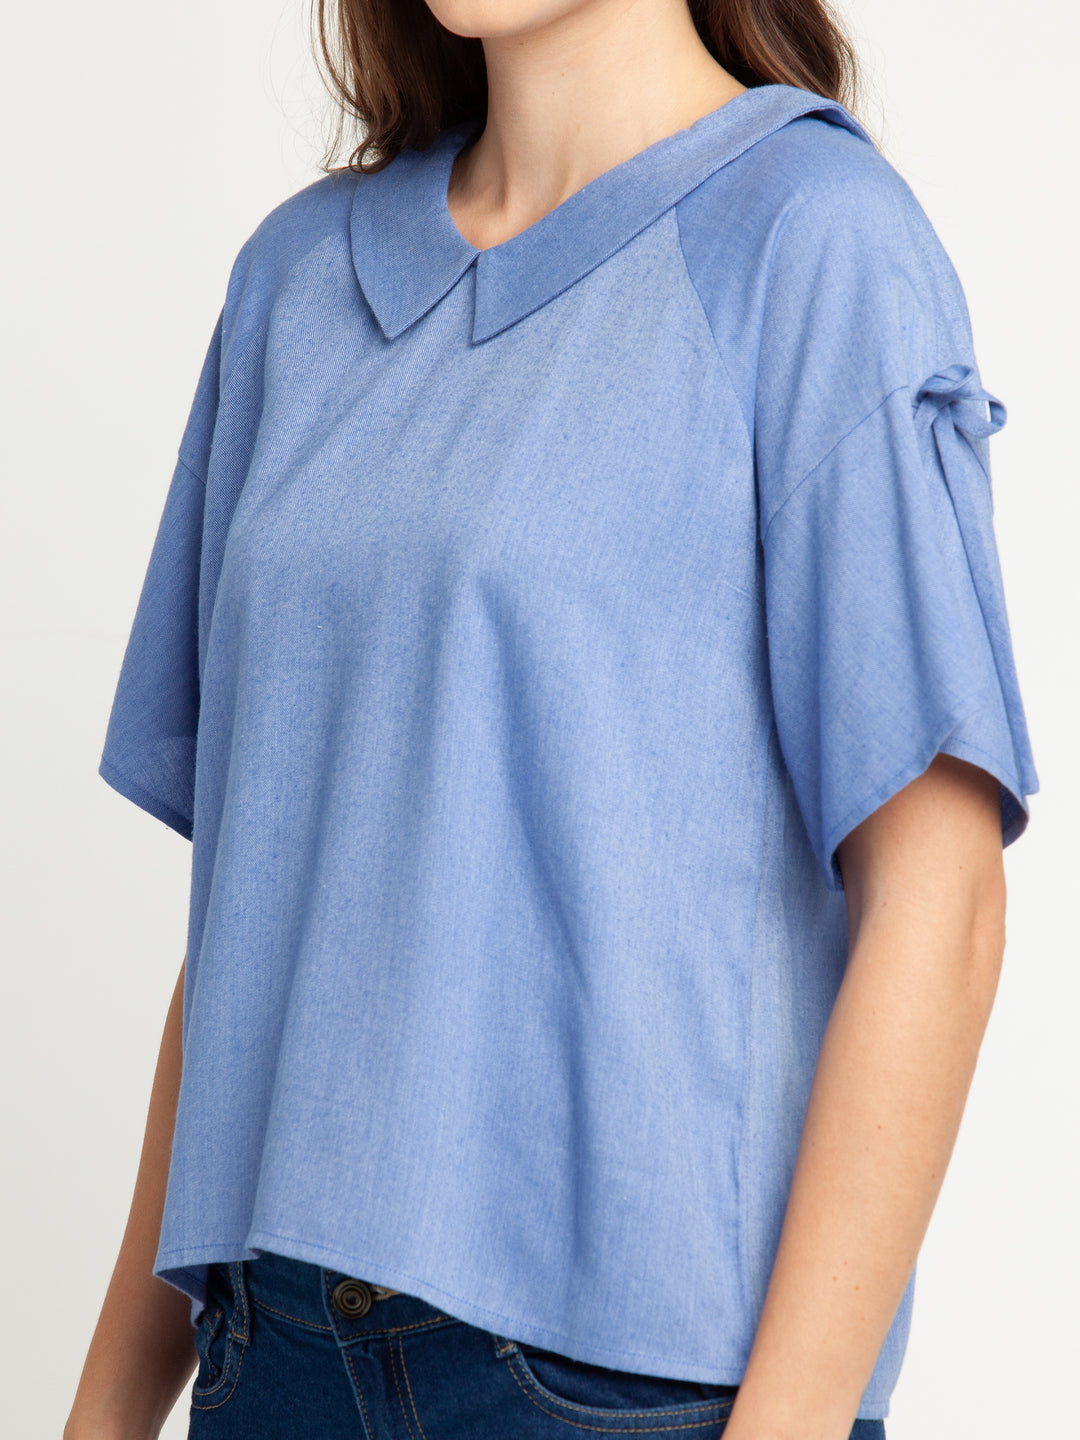 Blue Solid Top For Women